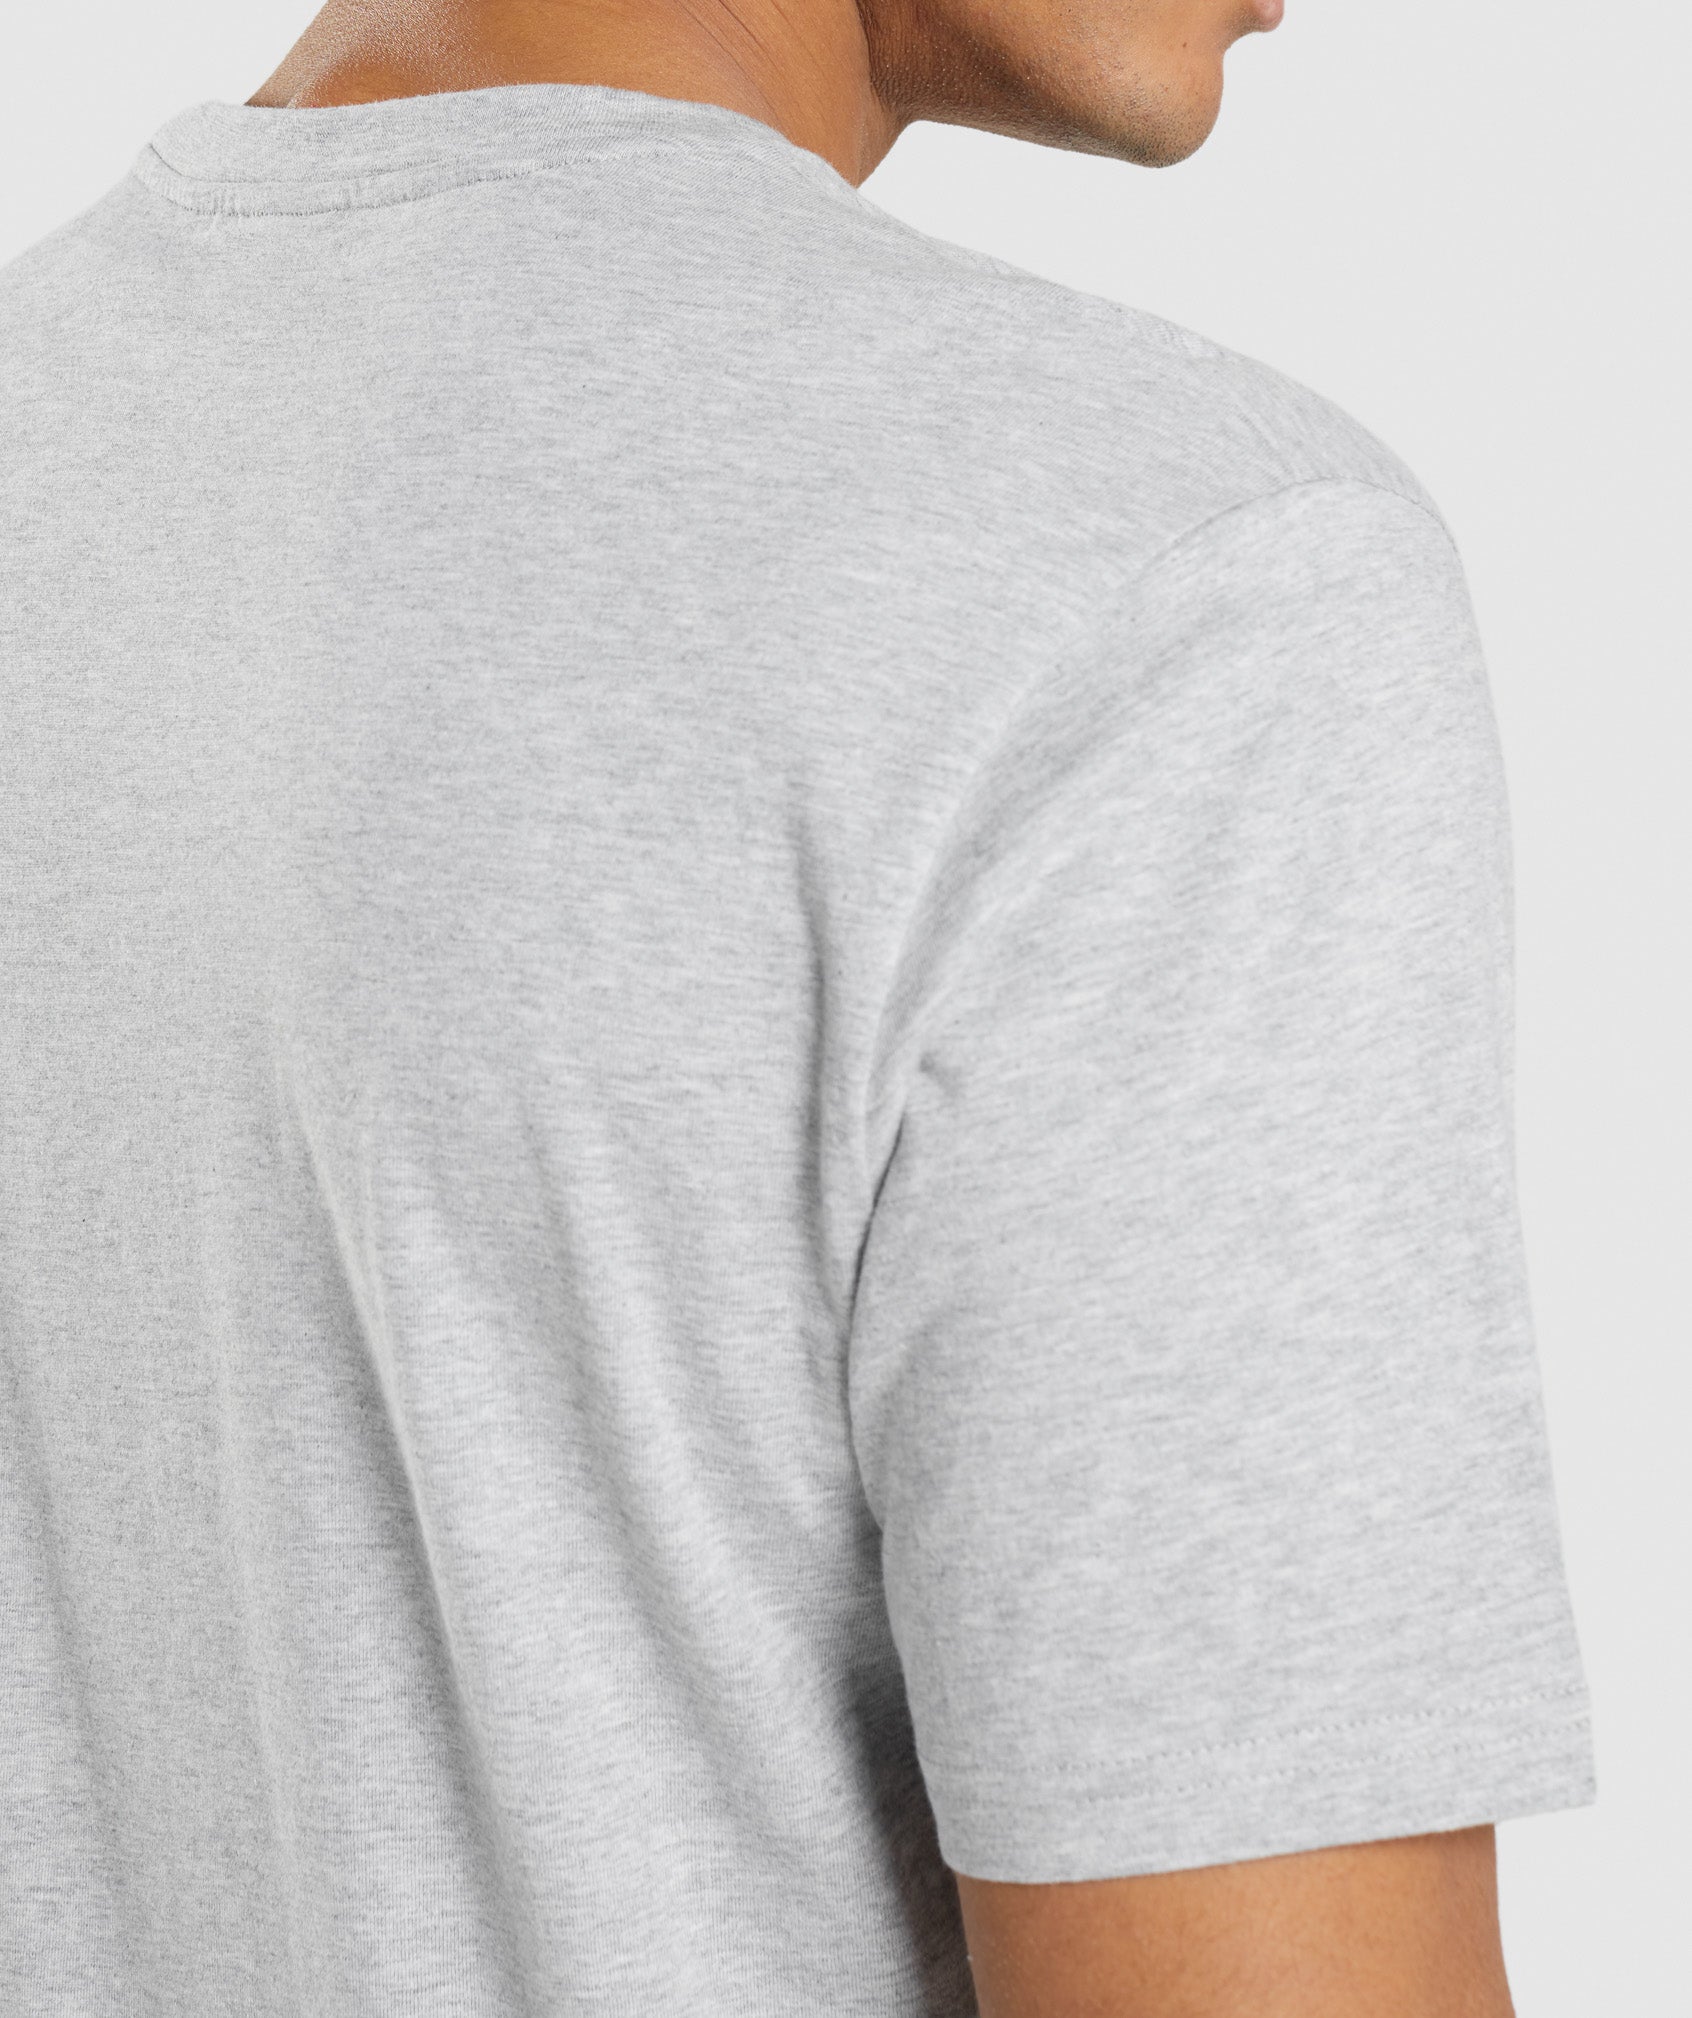 Crest T-Shirt in Light Grey Marl - view 5